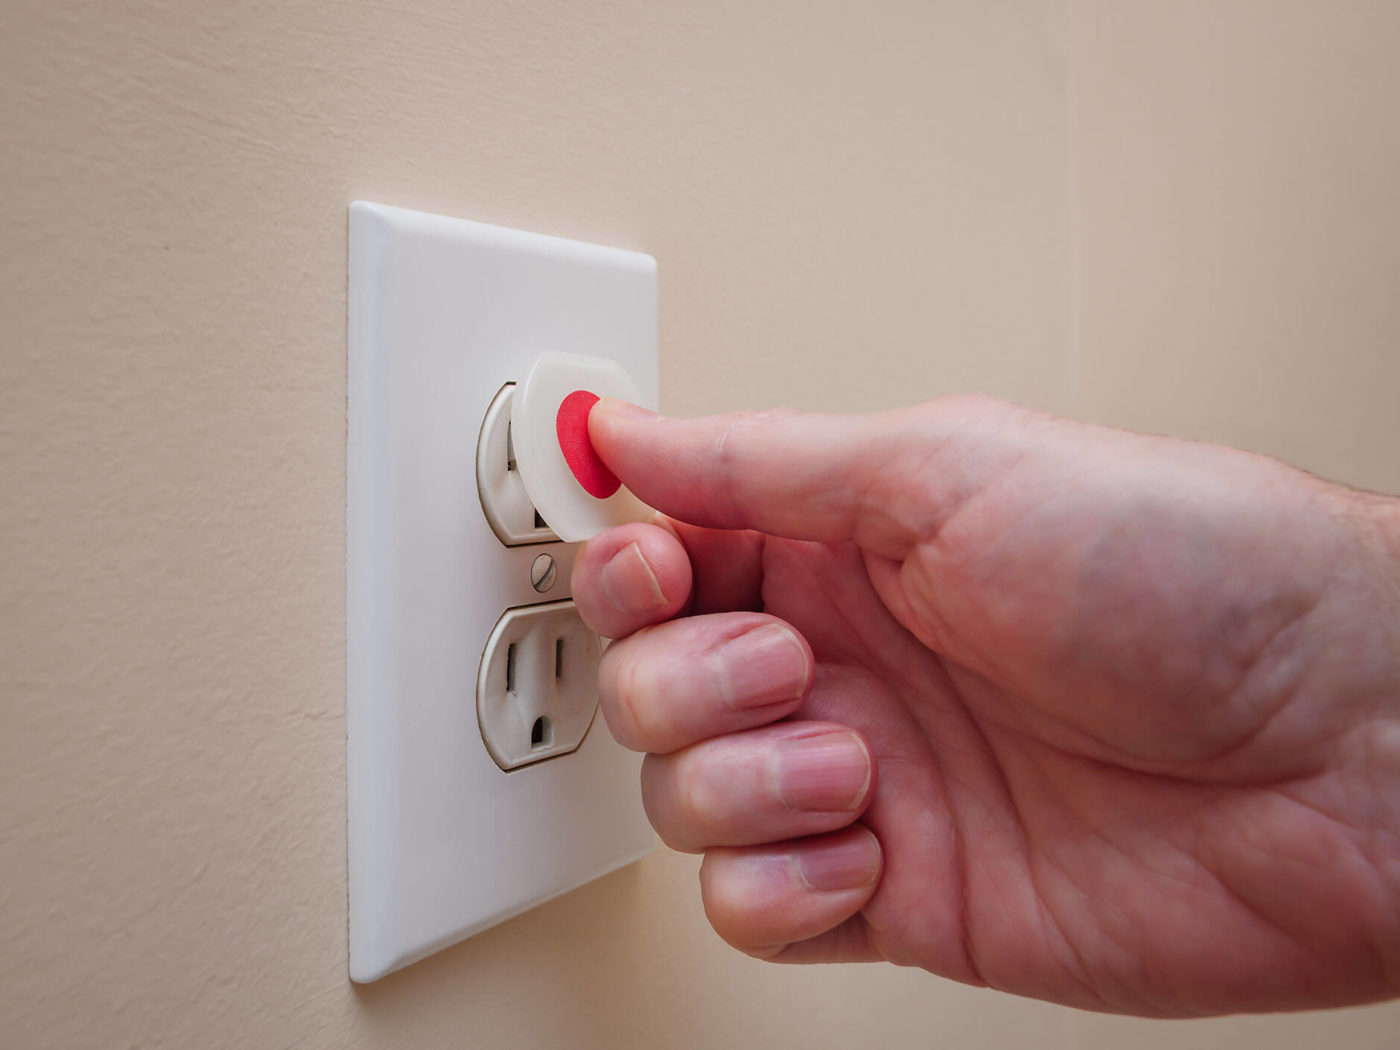 A hand taping over an electrical outlet